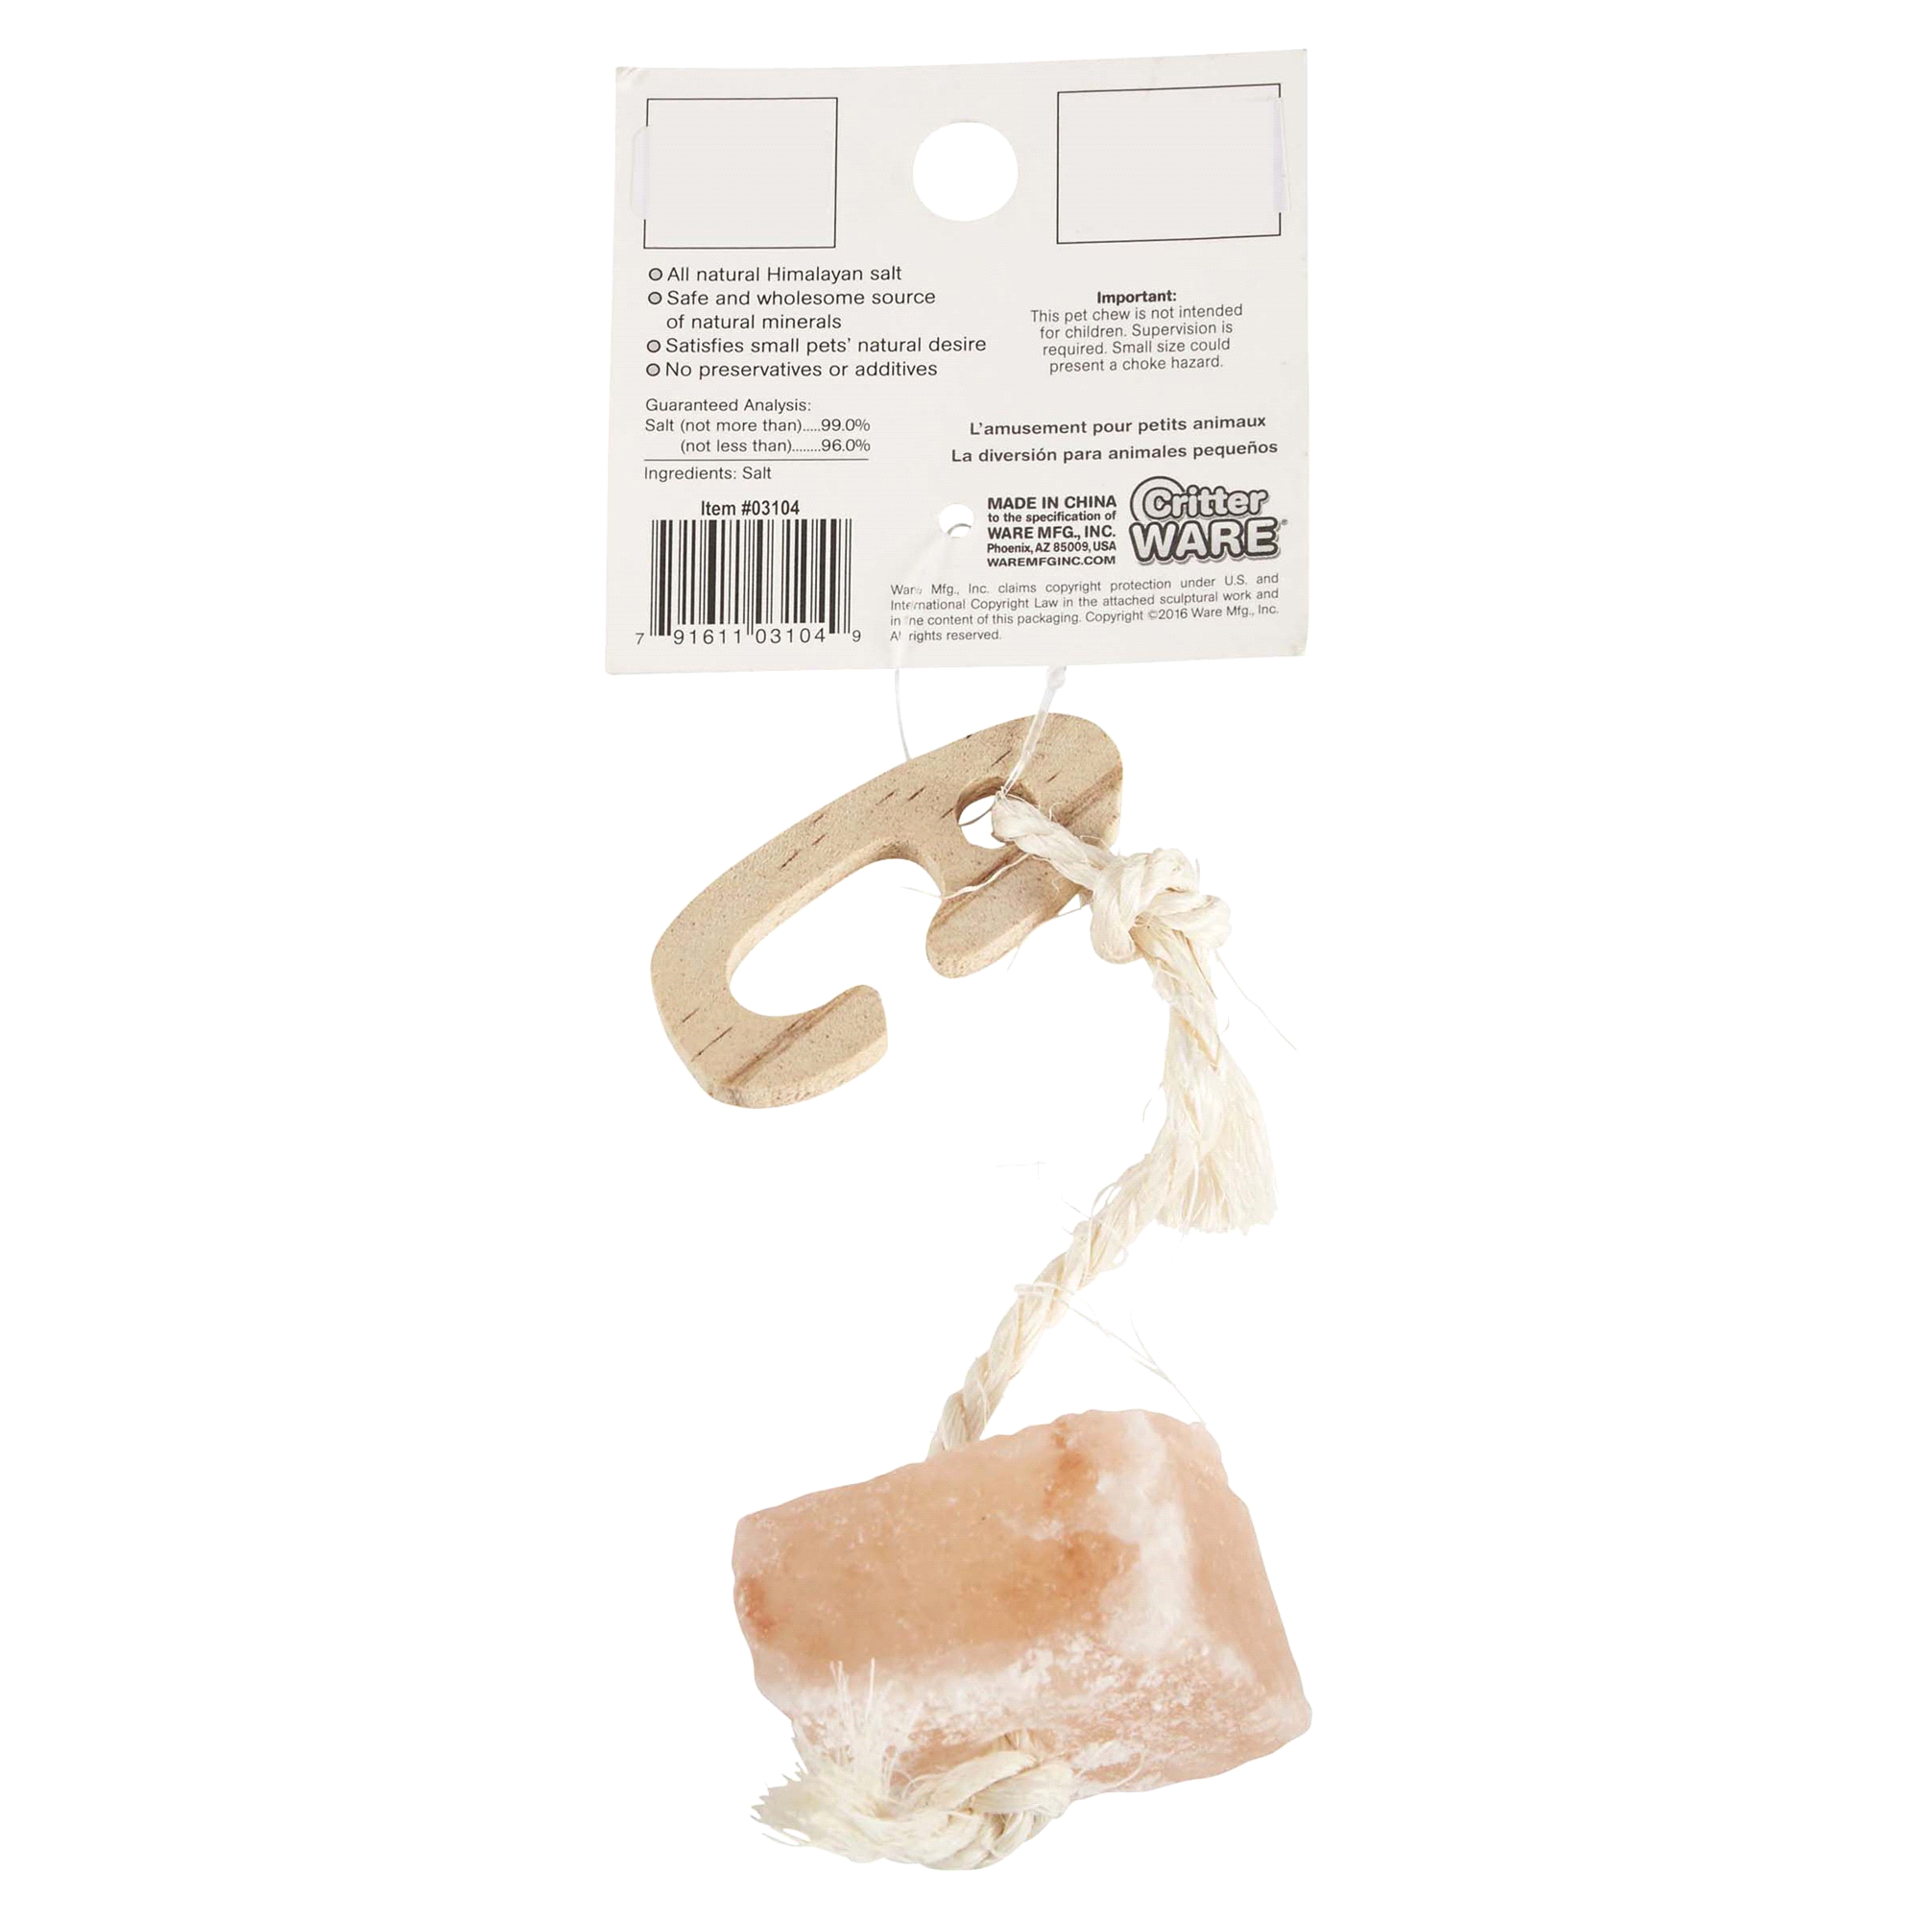 slide 5 of 5, Ware Pet Products Critter Ware Himalayan Salt-On-Rope For Small Animals, 1 oz